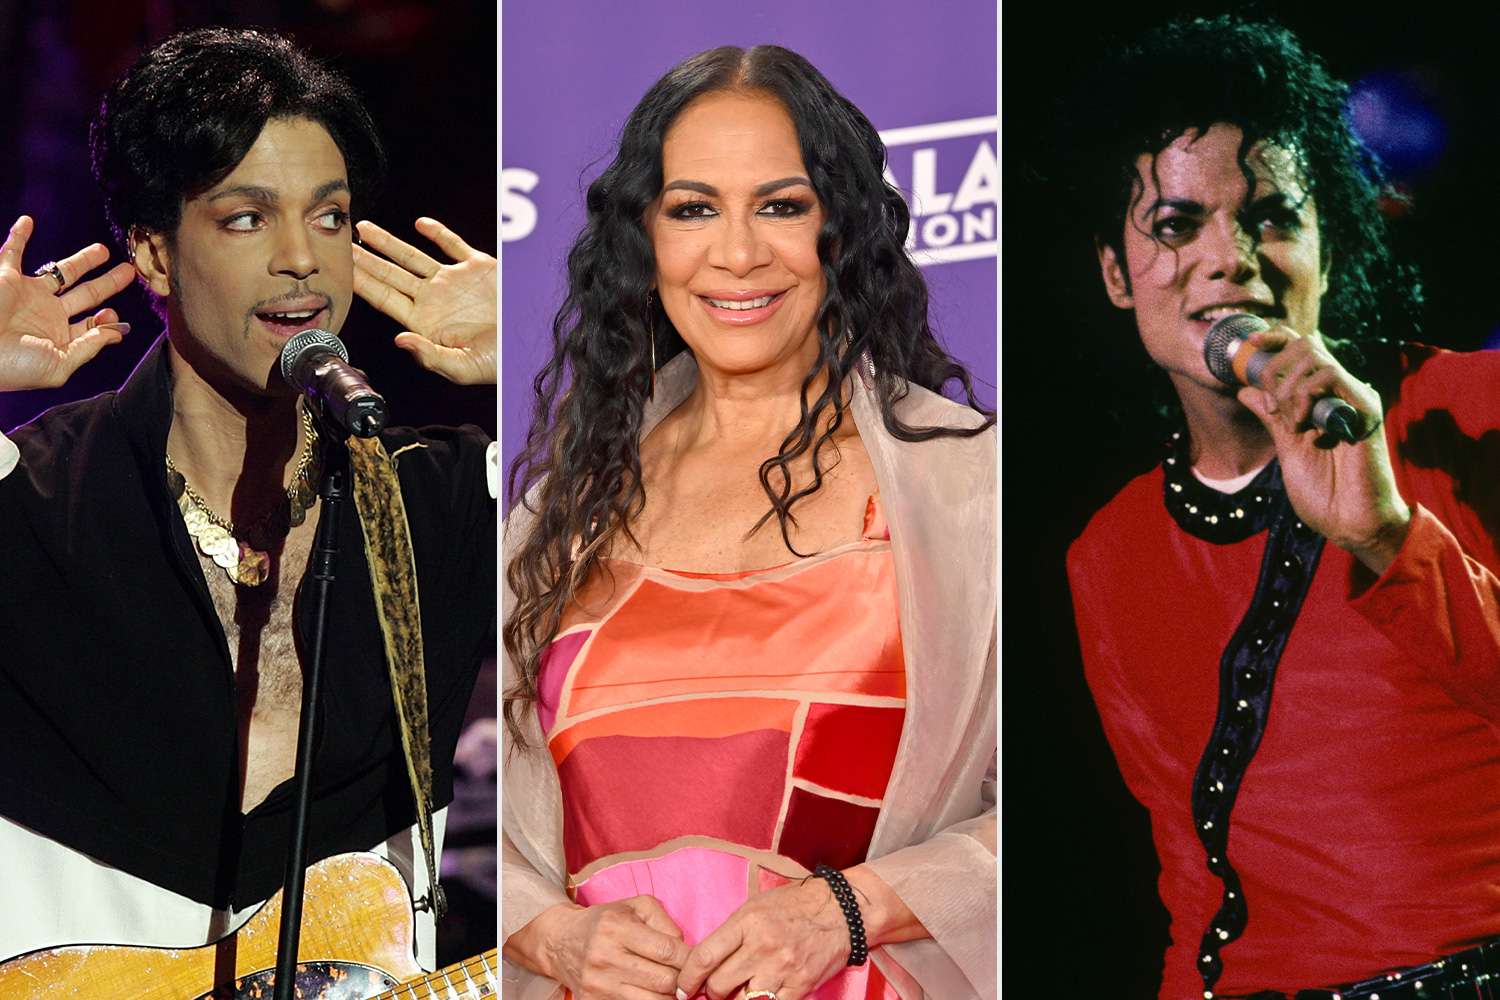 Prince Once Recorded and Immediately Deleted a Solo Rendition of Michael Jackson's 'Bad,' Sheila E. Says